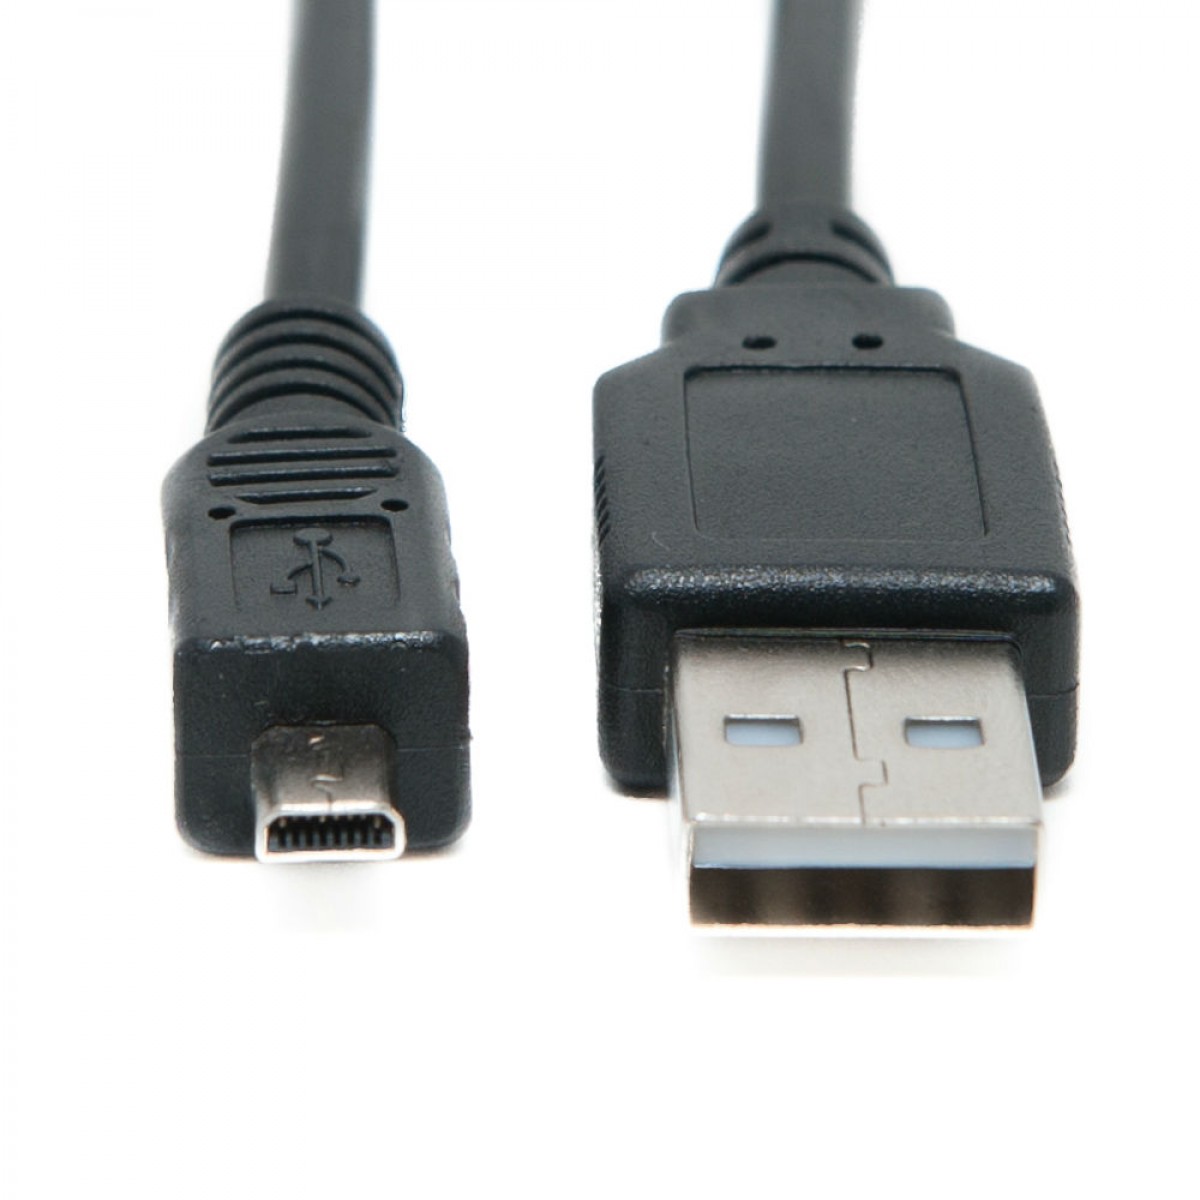 USB&AV TV CABLE FOR PENTAX K100D K10D K110D K-2000 K-200D K-20D K-7 E75 E8 M10 M20 M30 M40 W60 WP WPi X W30 Lysee Data Cables Color: USB CABLE 